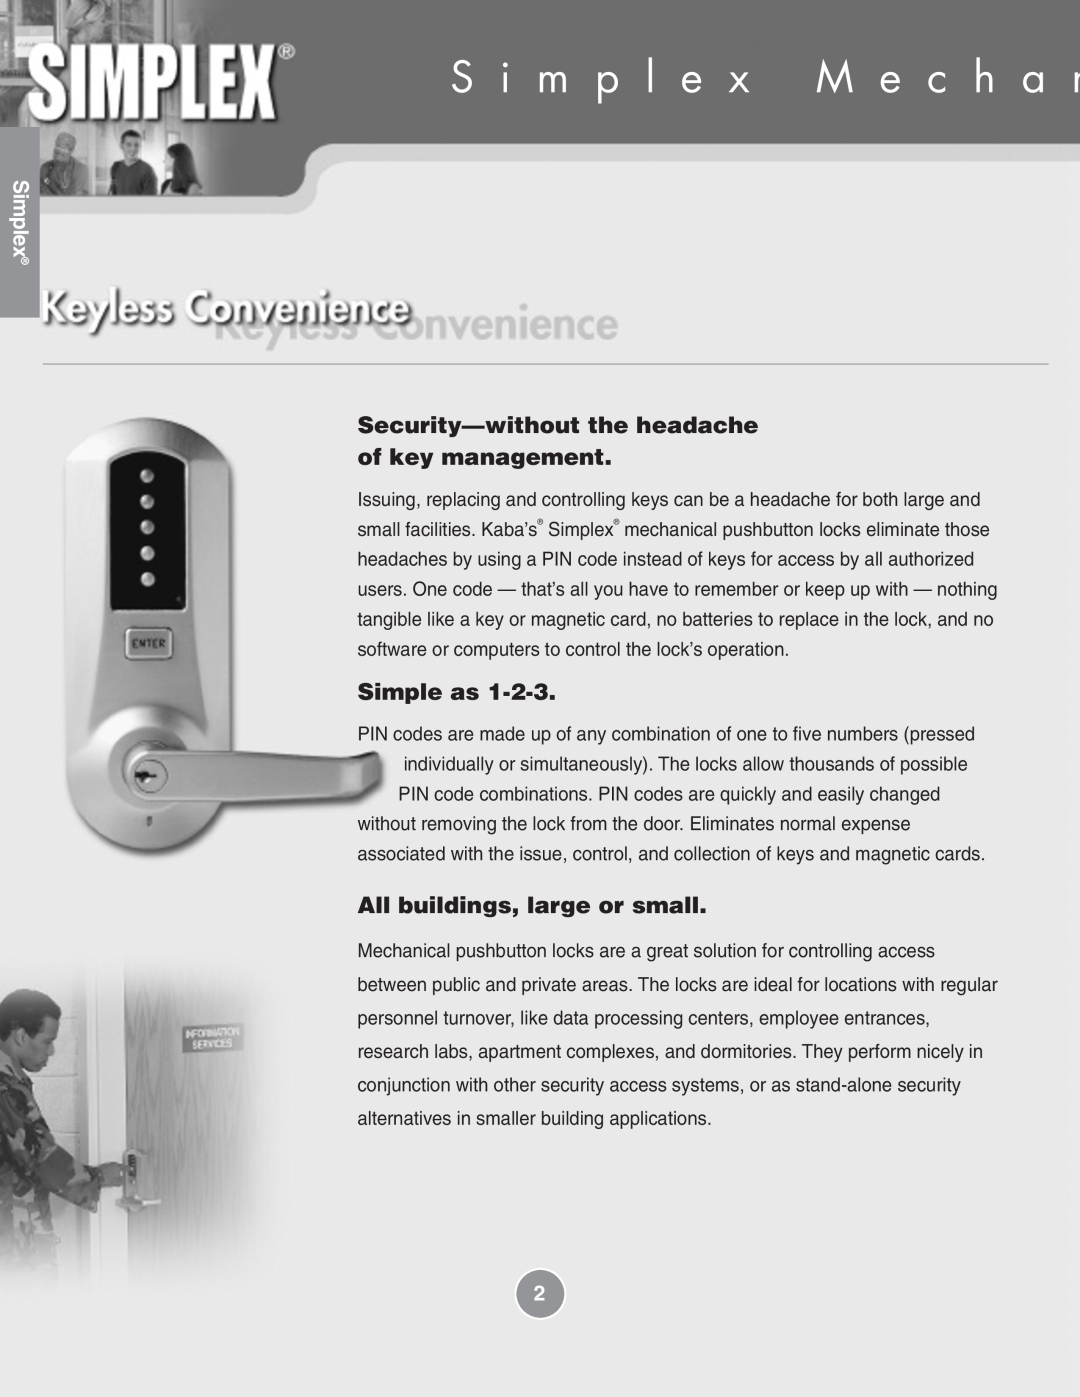 Assa Mechanical Pushbutton Locks S i m p l e x M e c h a n, Security-without the headache of key management, Simple as 